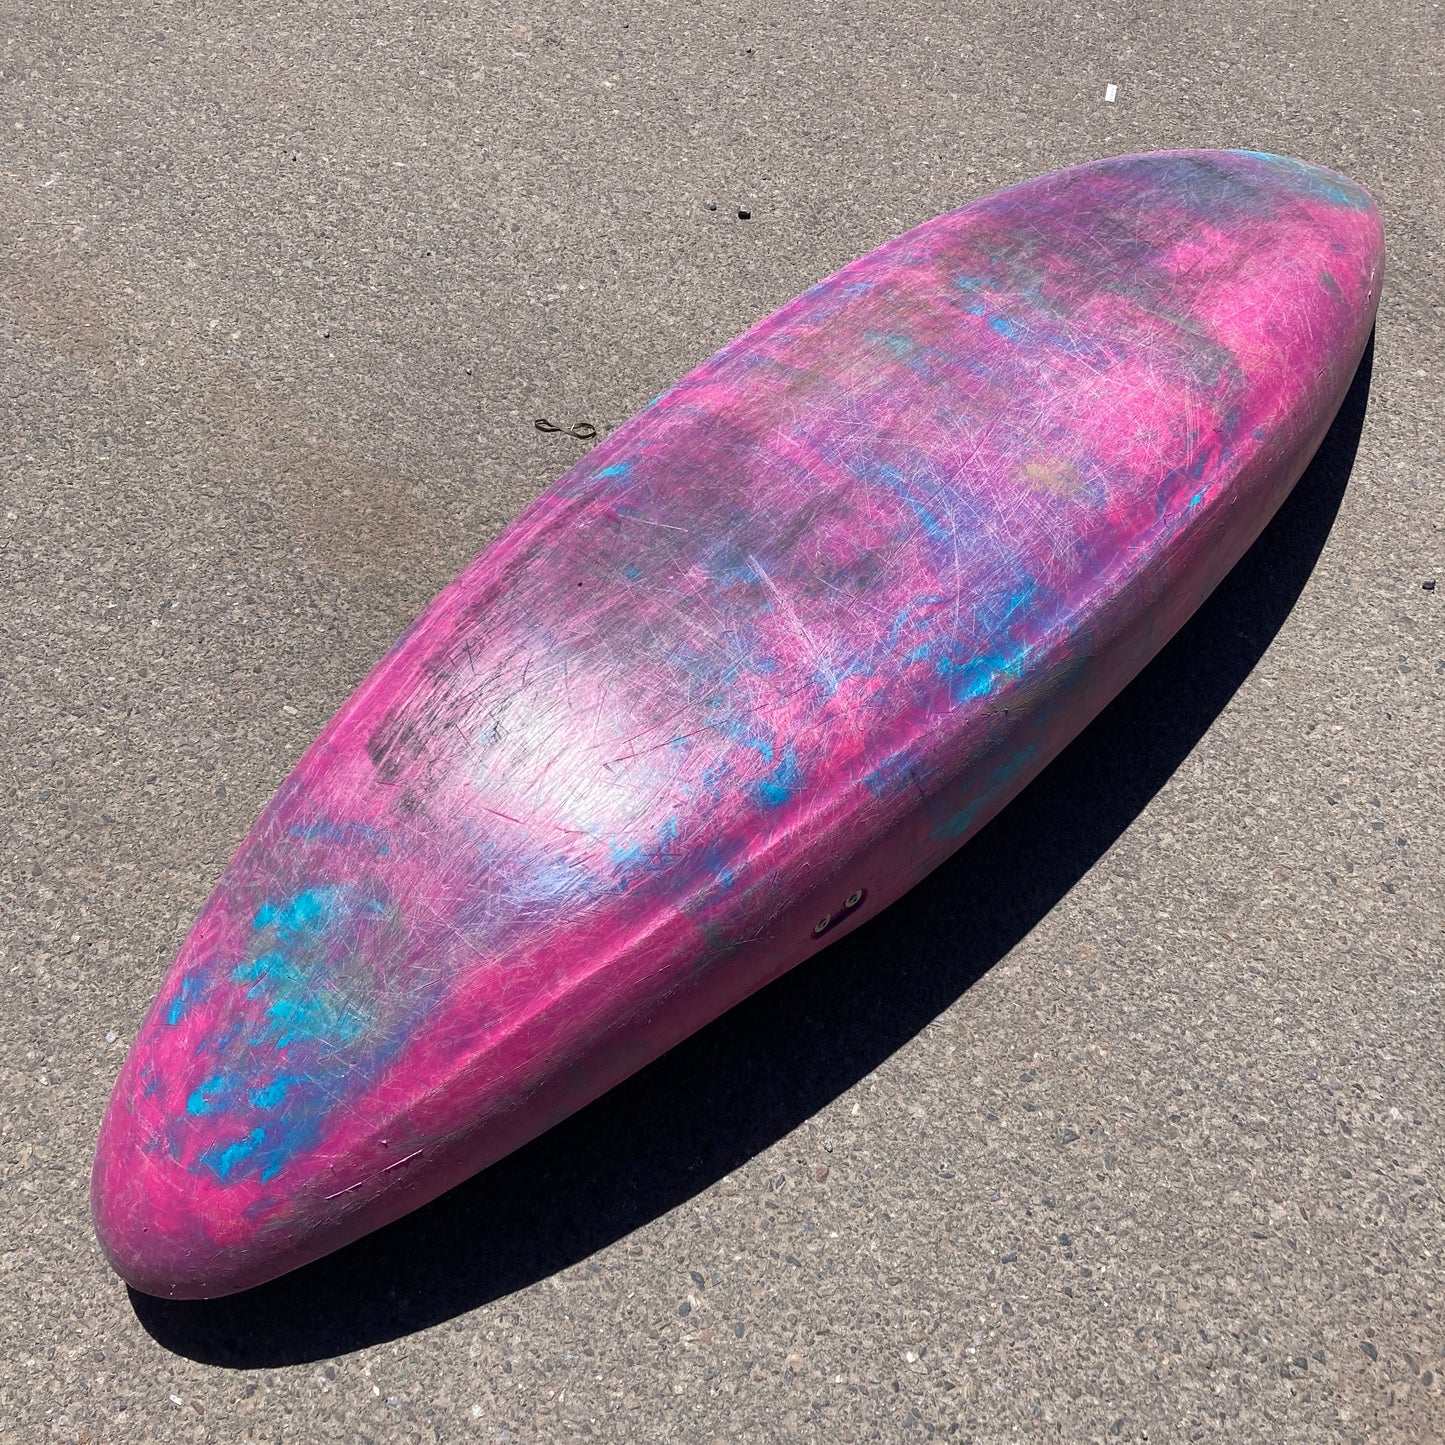 A colorful, well-worn Consignment Dagger Mamba 7.6 kayak with pink and blue patterns lying on sunlit asphalt.